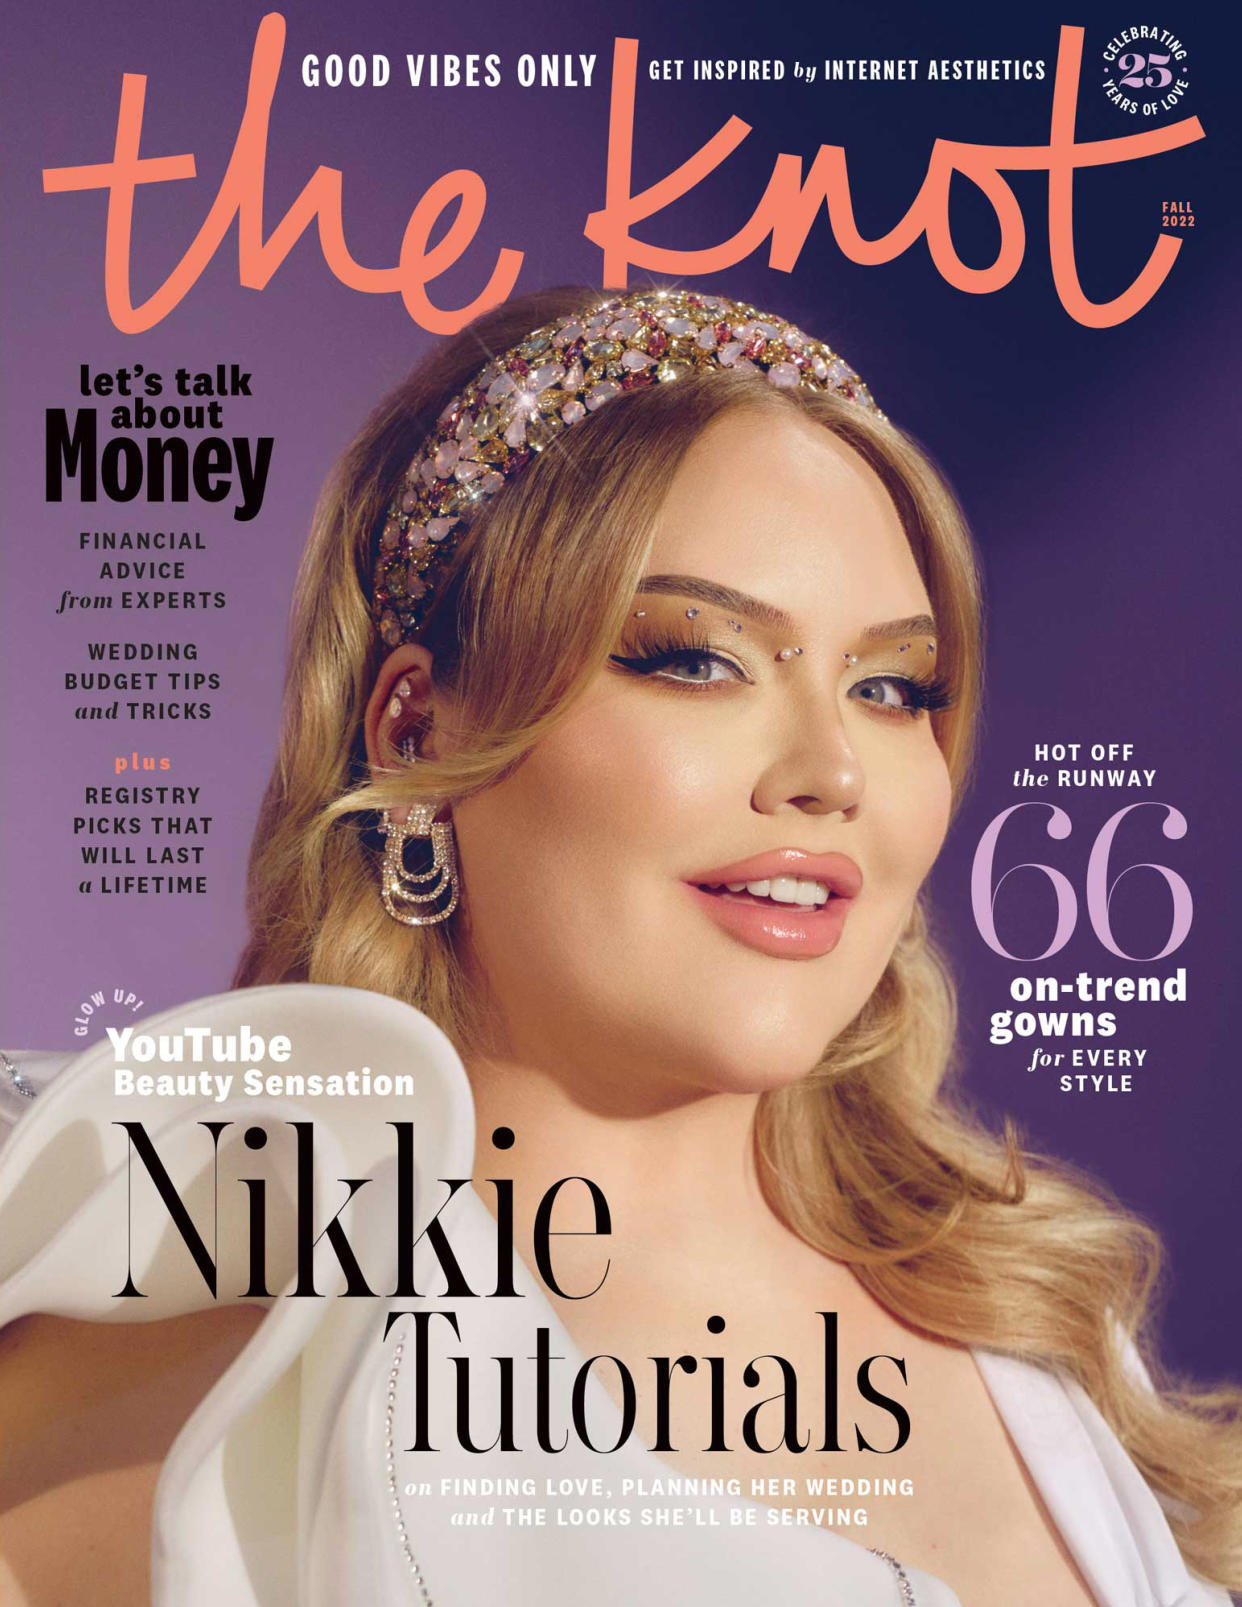 The beauty guru appears on the cover of the fall 2022 issue. (Photo: Meis Belle Wahr + Jip Merkies for The Knot)